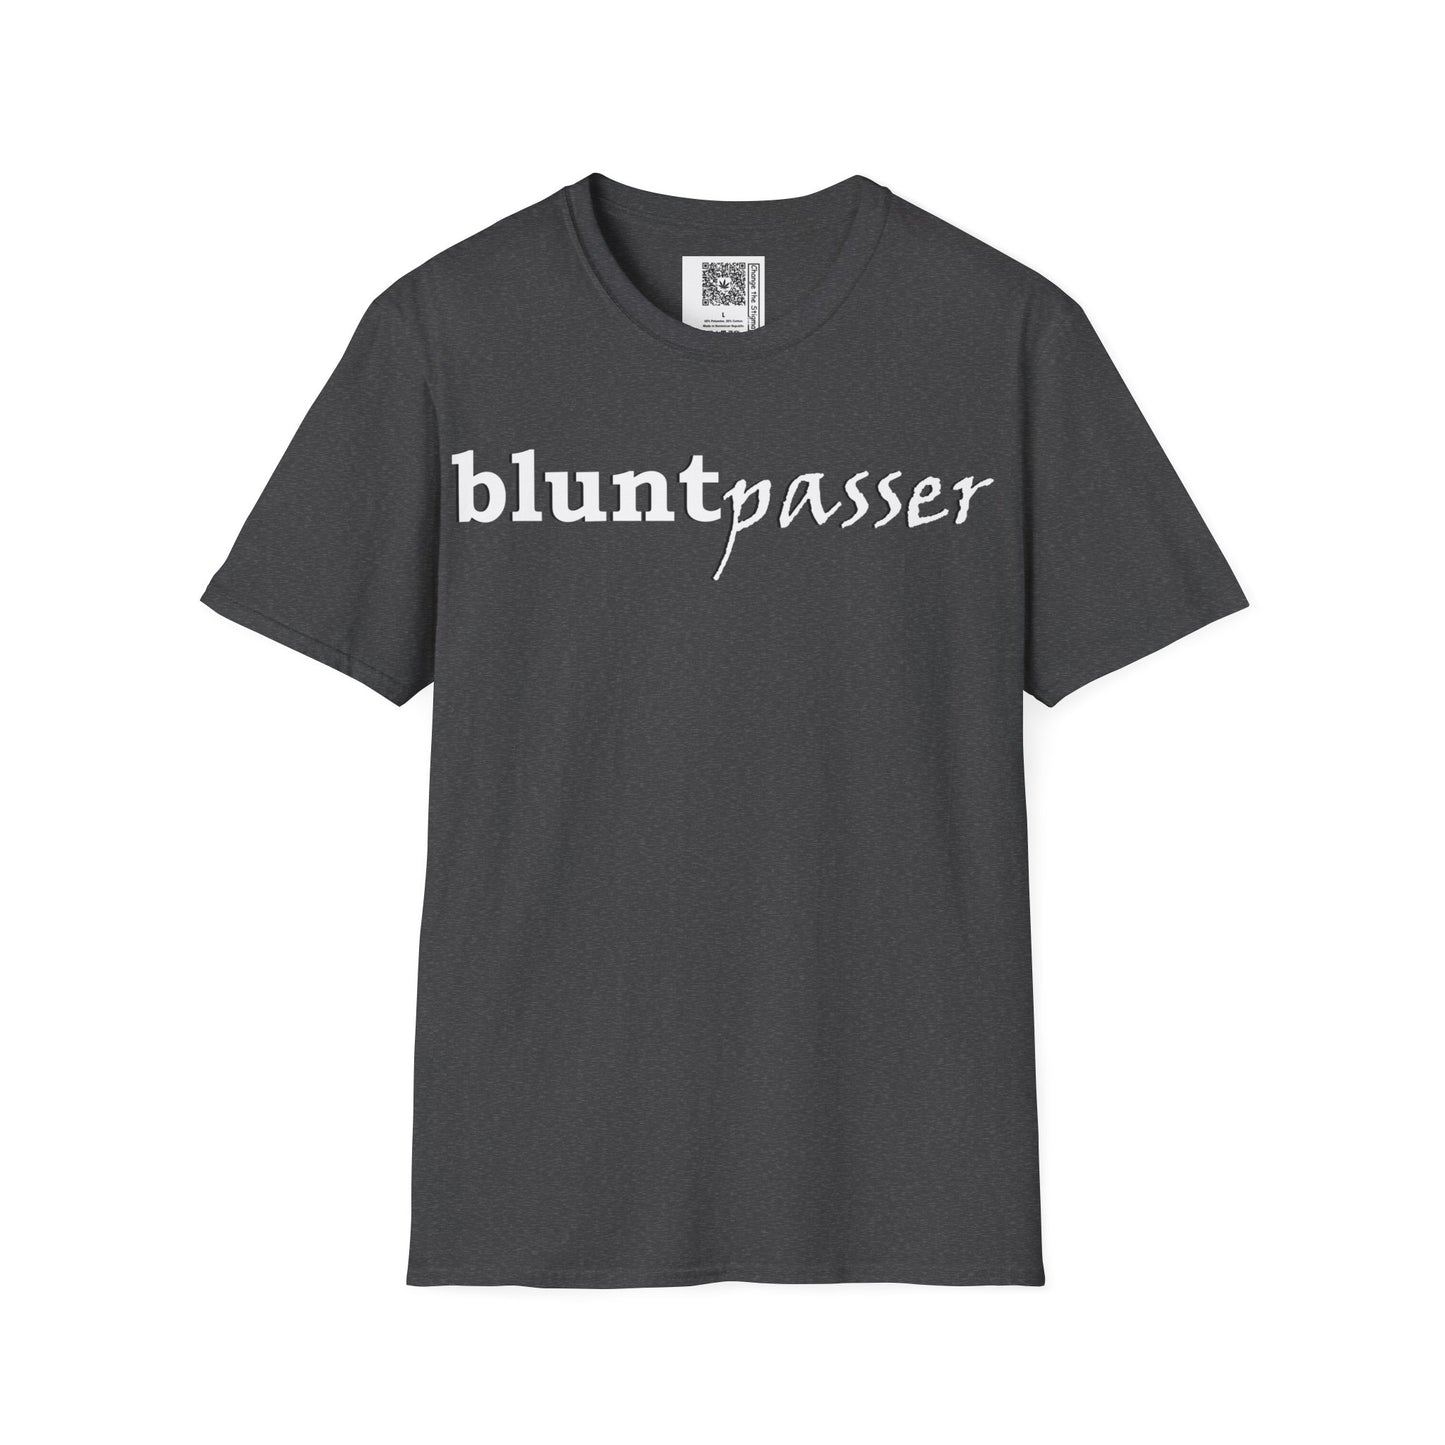 Change the Stigma, Dark Heather color, shirt saying "blunt passer", Shirt is open displayed, Qr code is shown neck tag